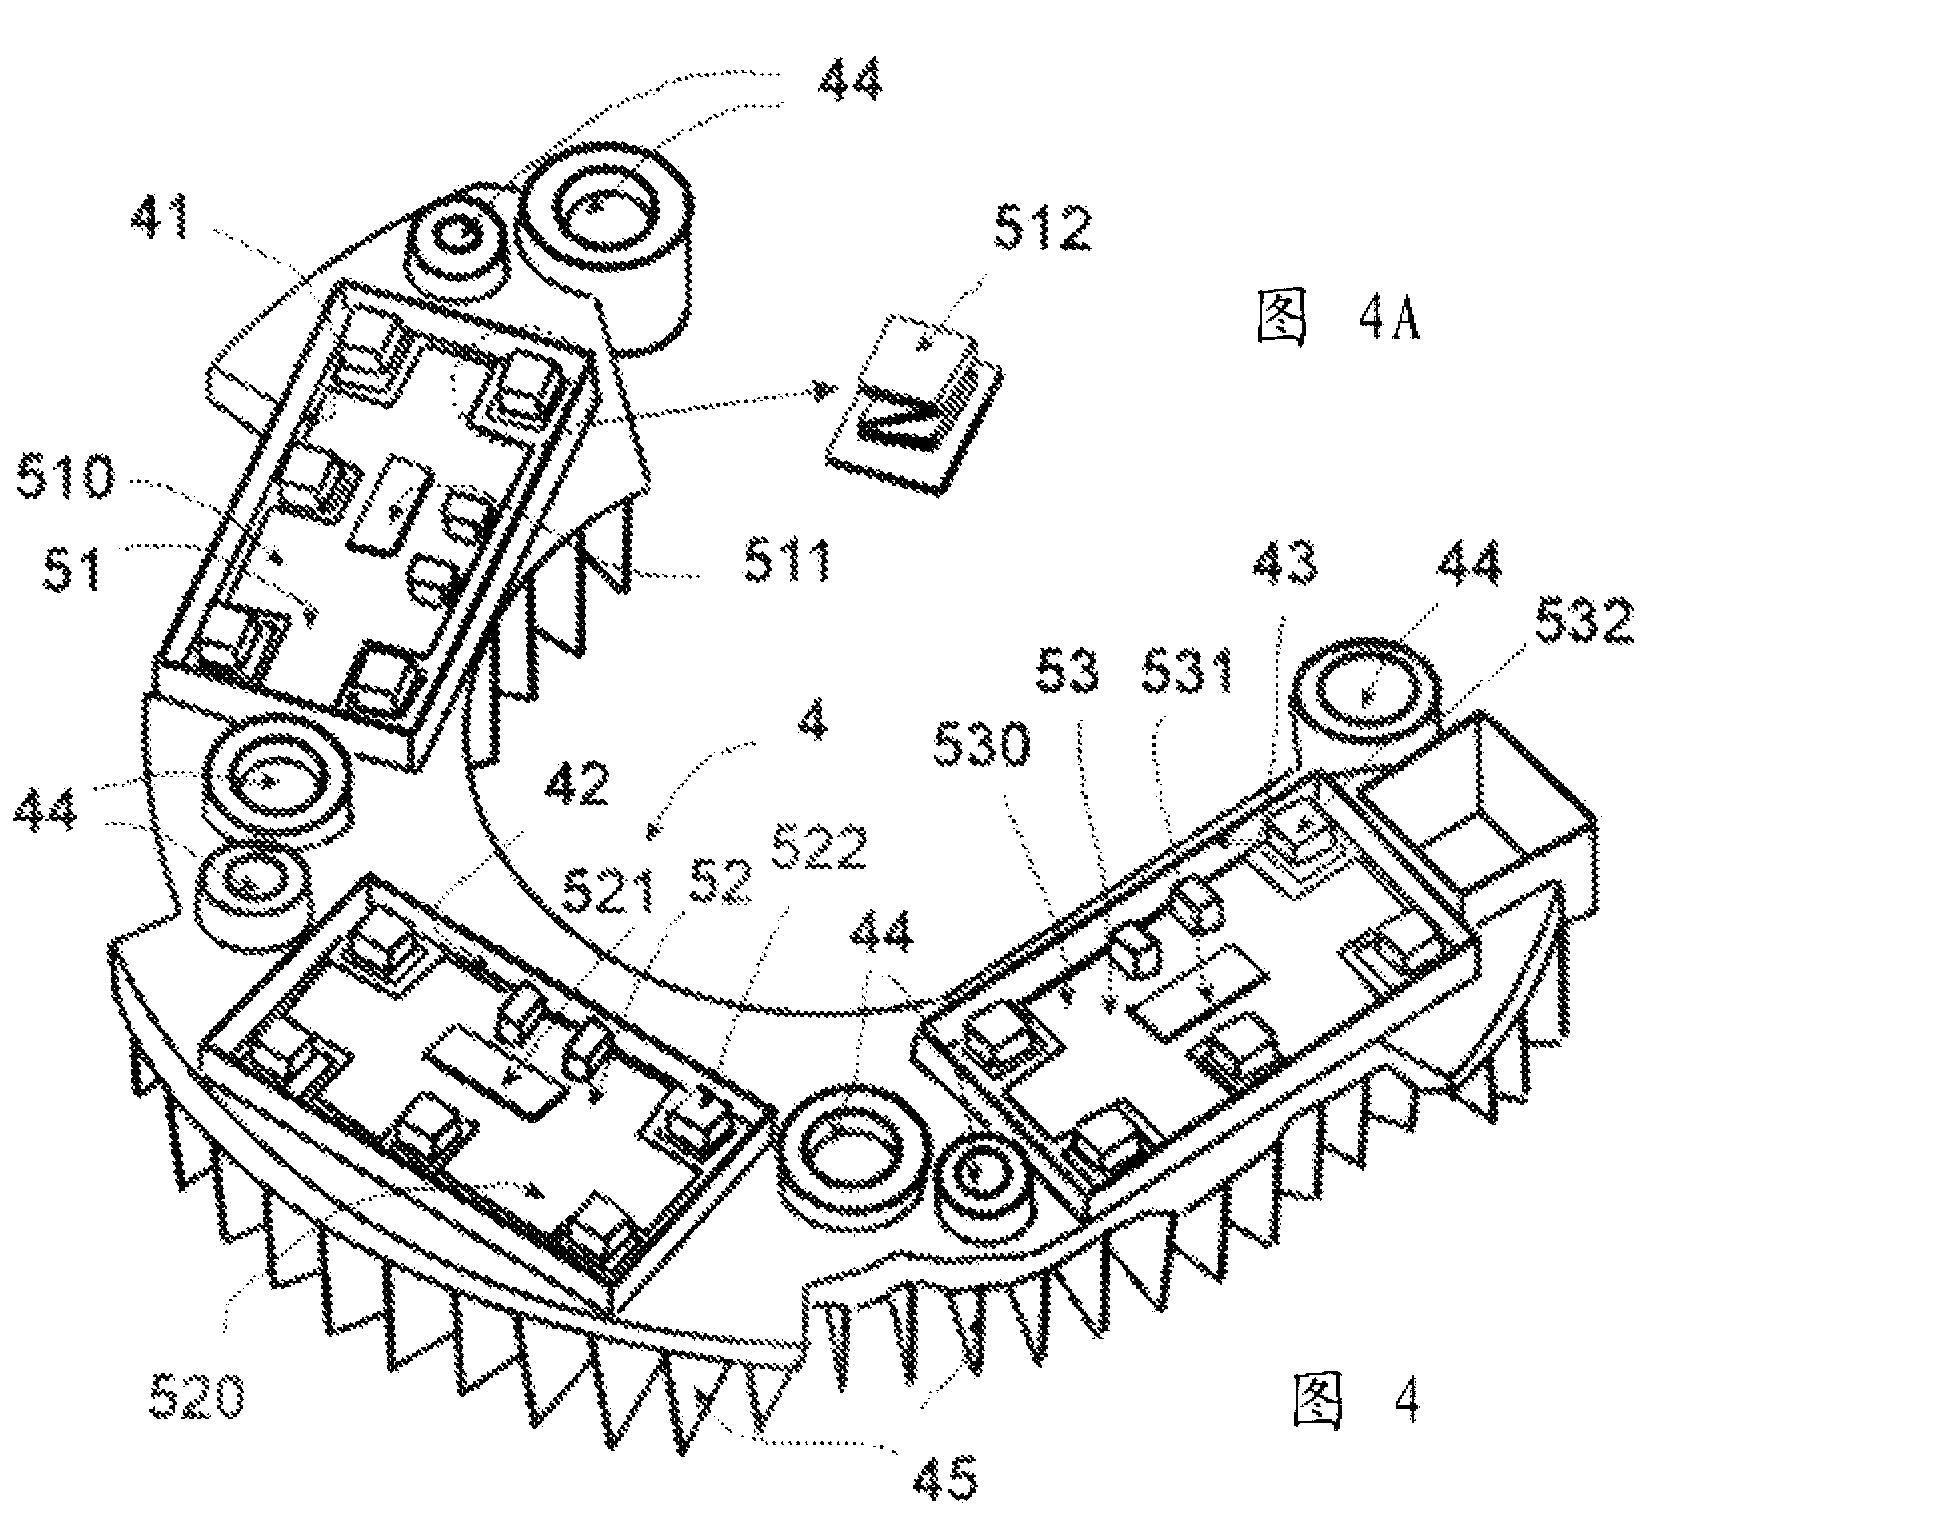 Method for interconnecting electronic power modules of a rotary electric machine and assembly of interconnected power modules obtained using said method